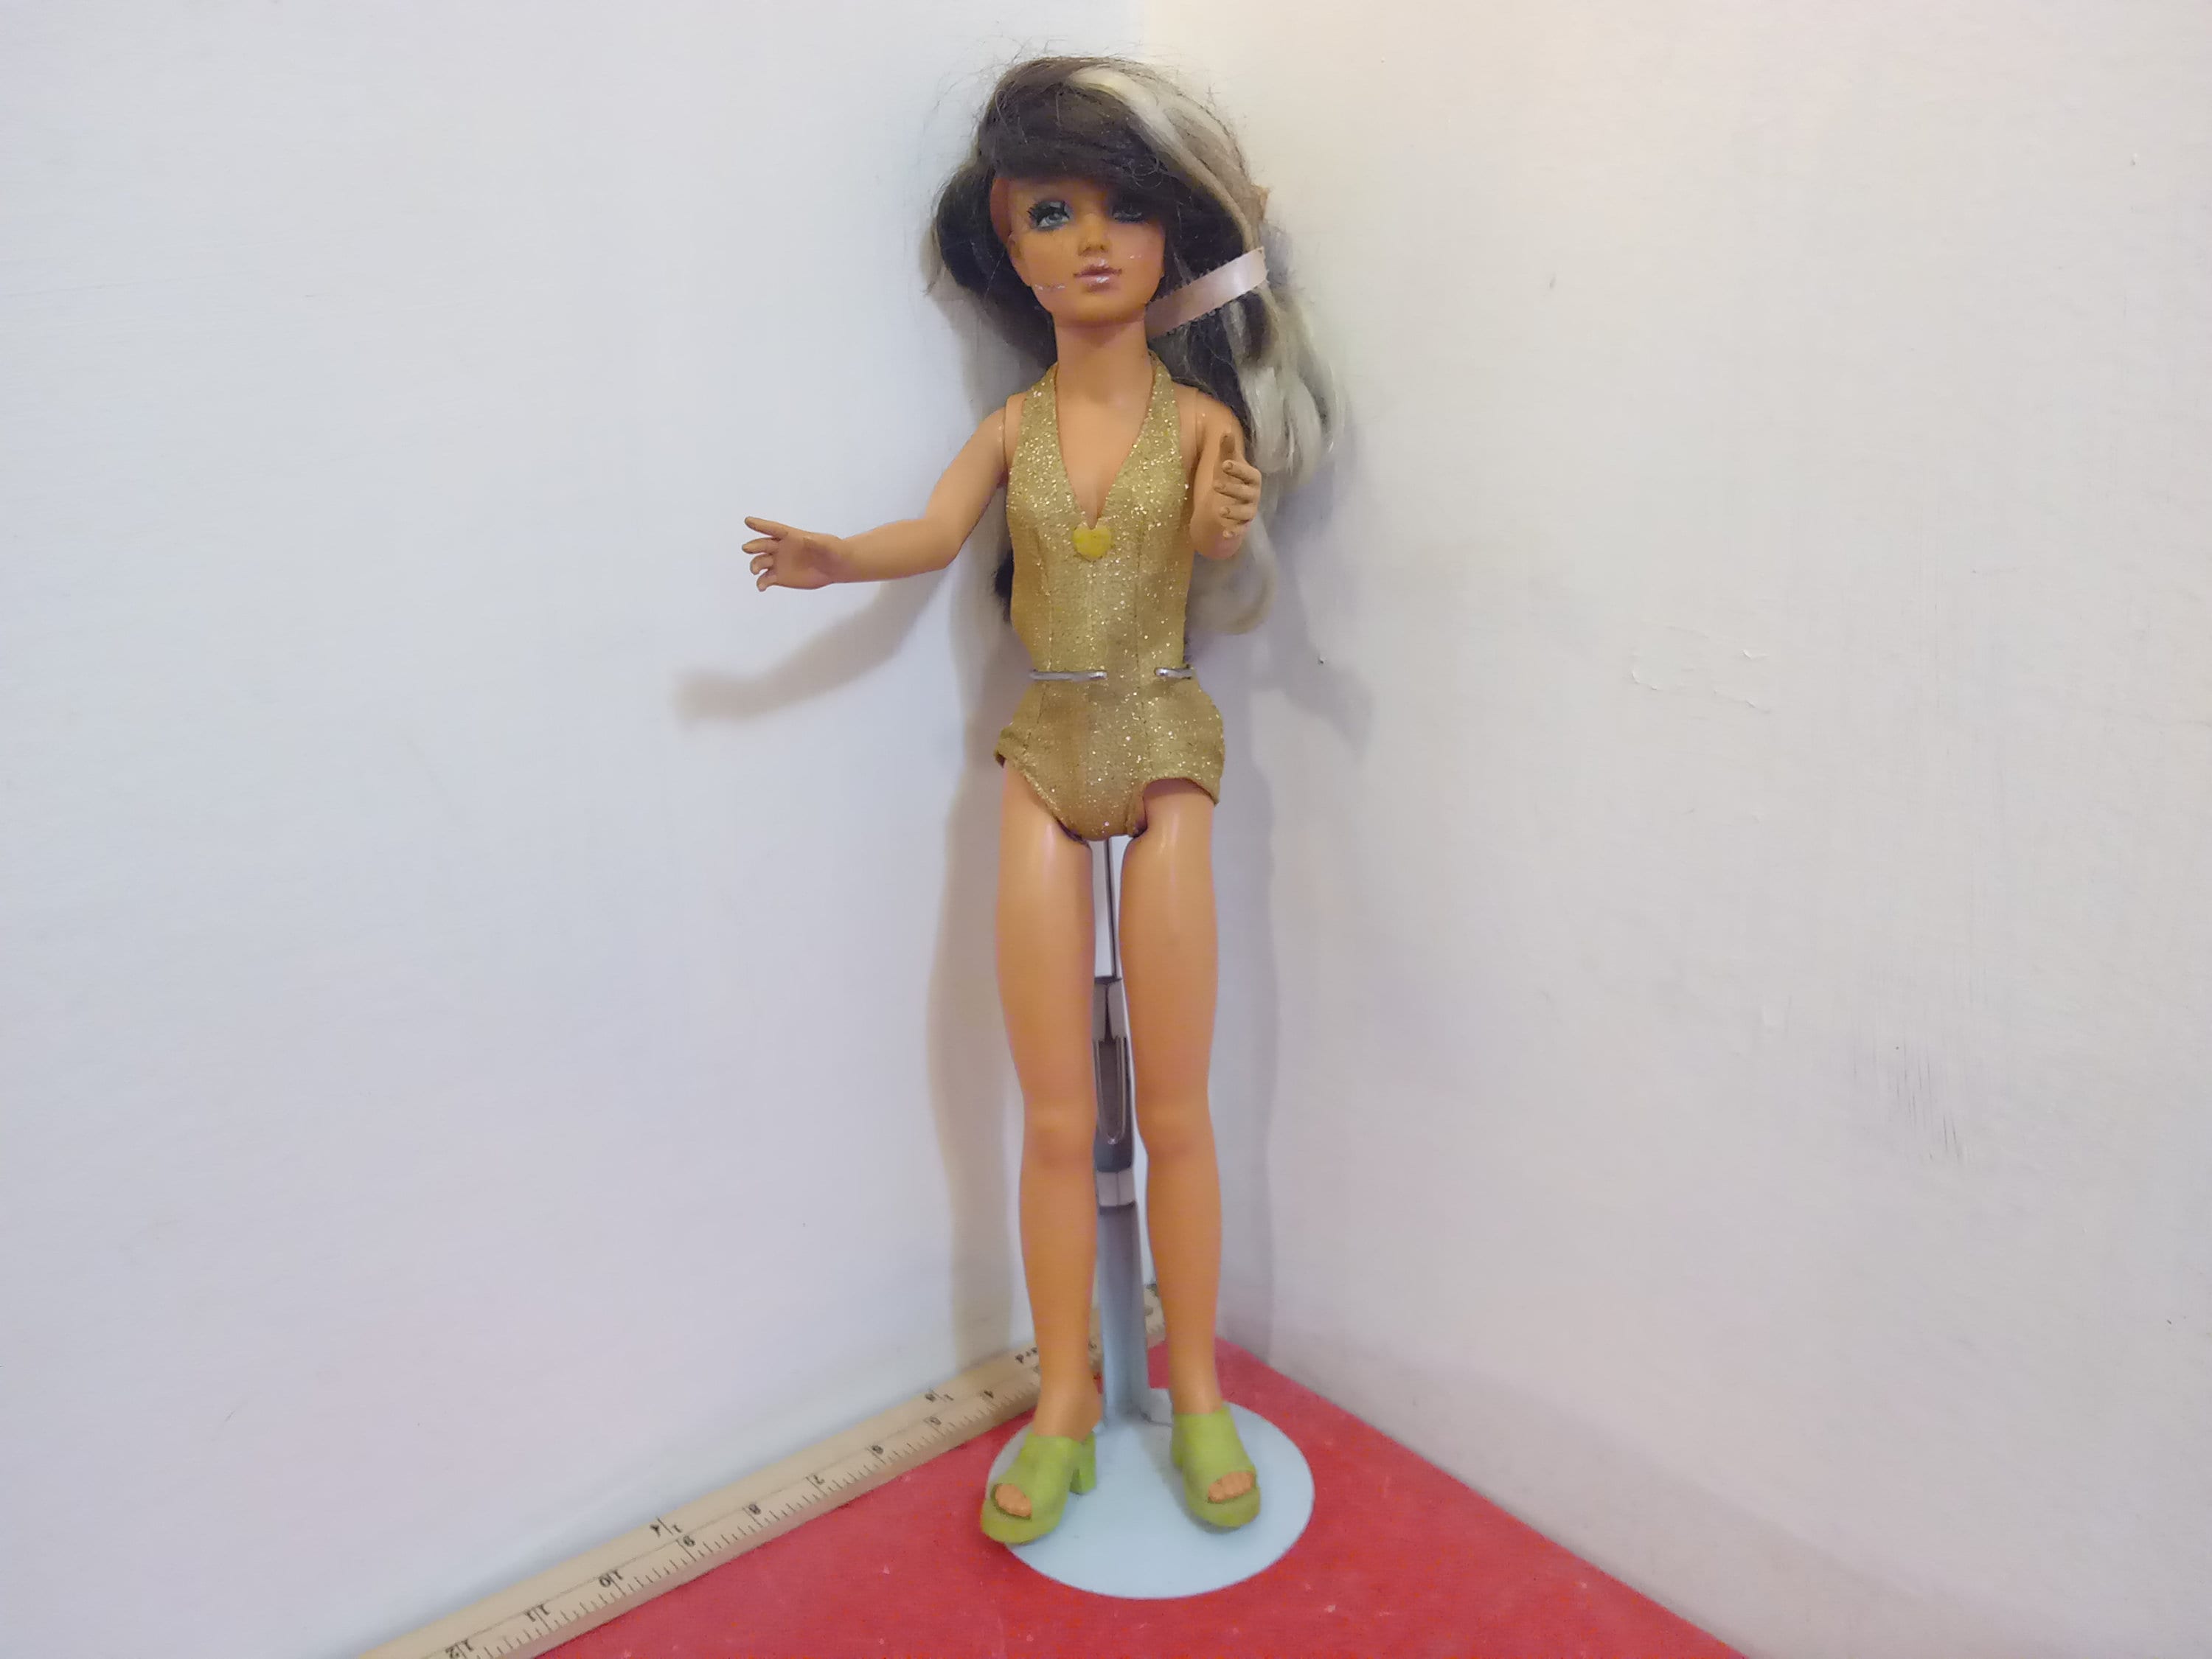 Vintage Vinyl Doll Tiffany by Ideal With Color Changing Hair pic pic image